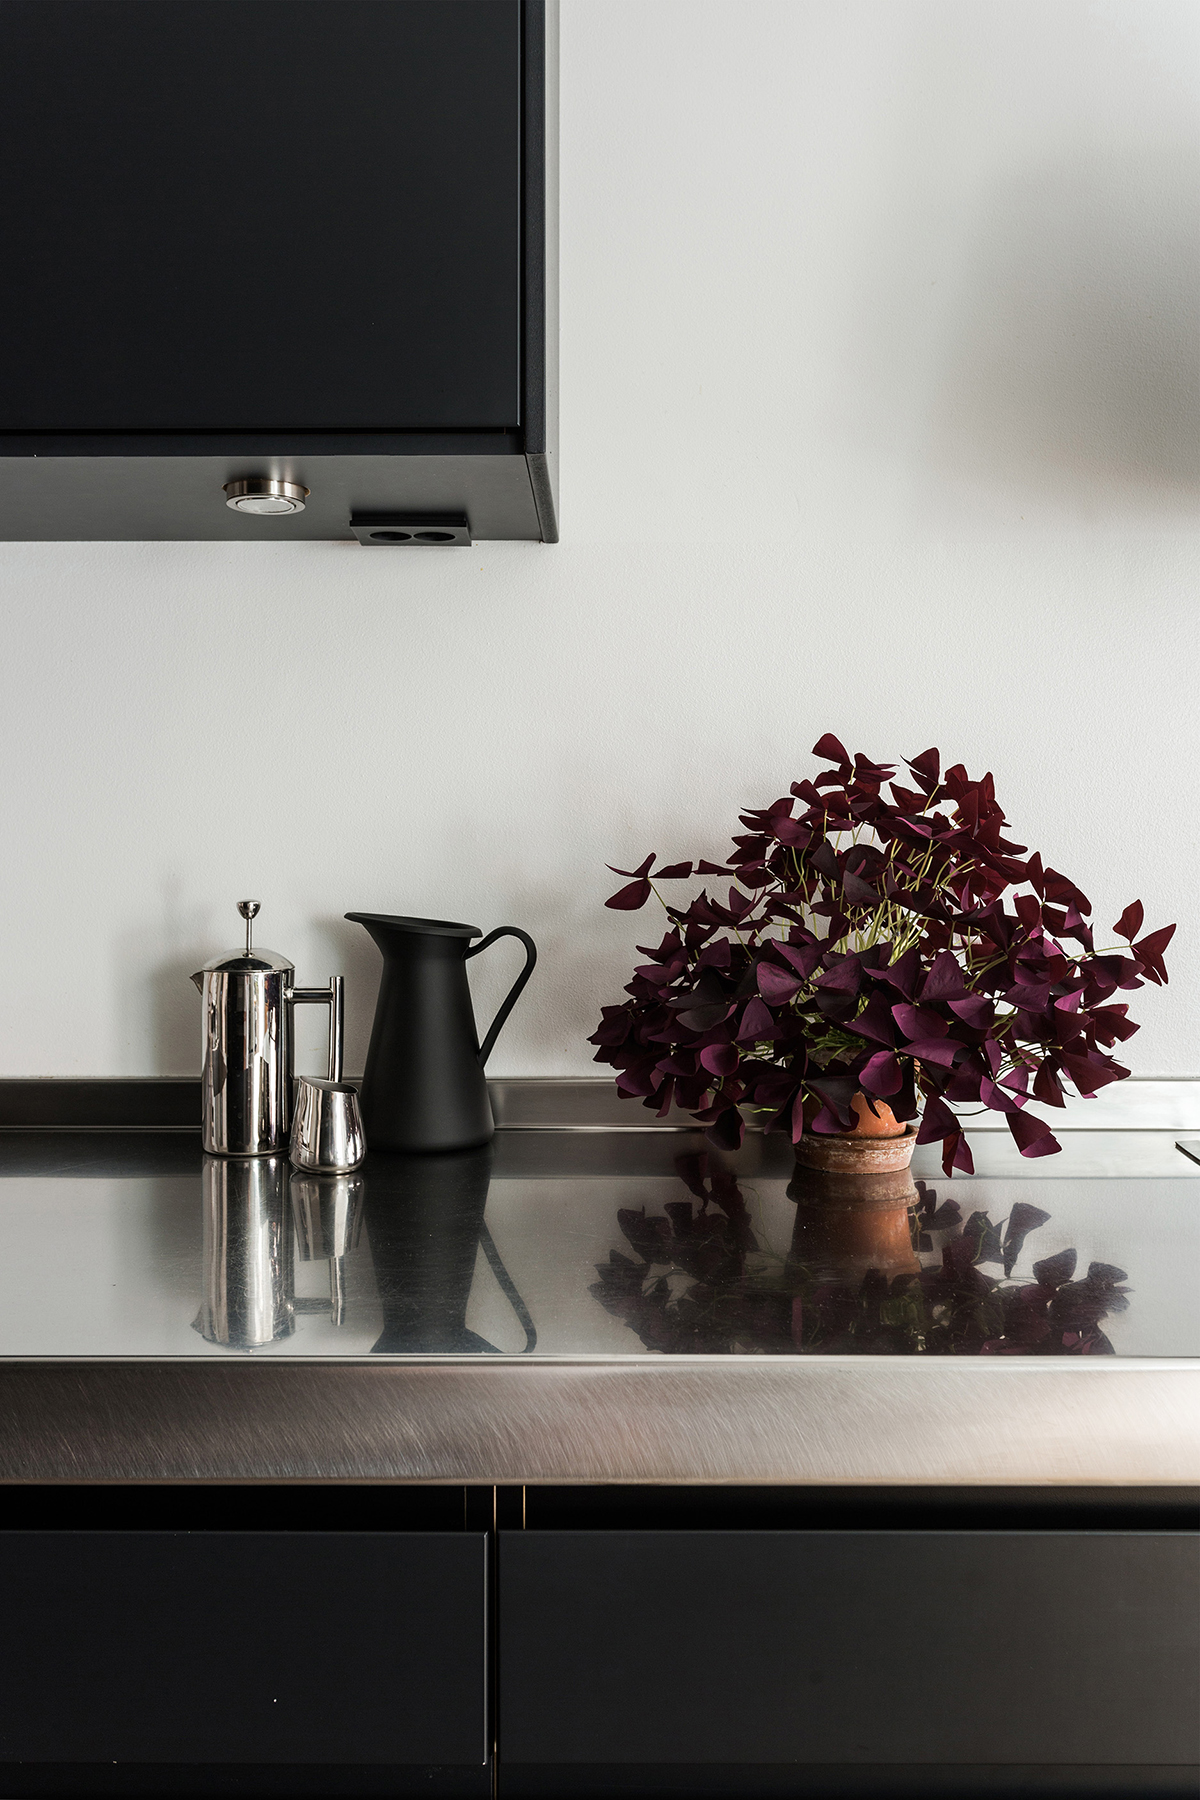 http://www.we-are-scout.com/wp-content/uploads/2016/08/Stockholm-apartment-black-kitchen.jpg